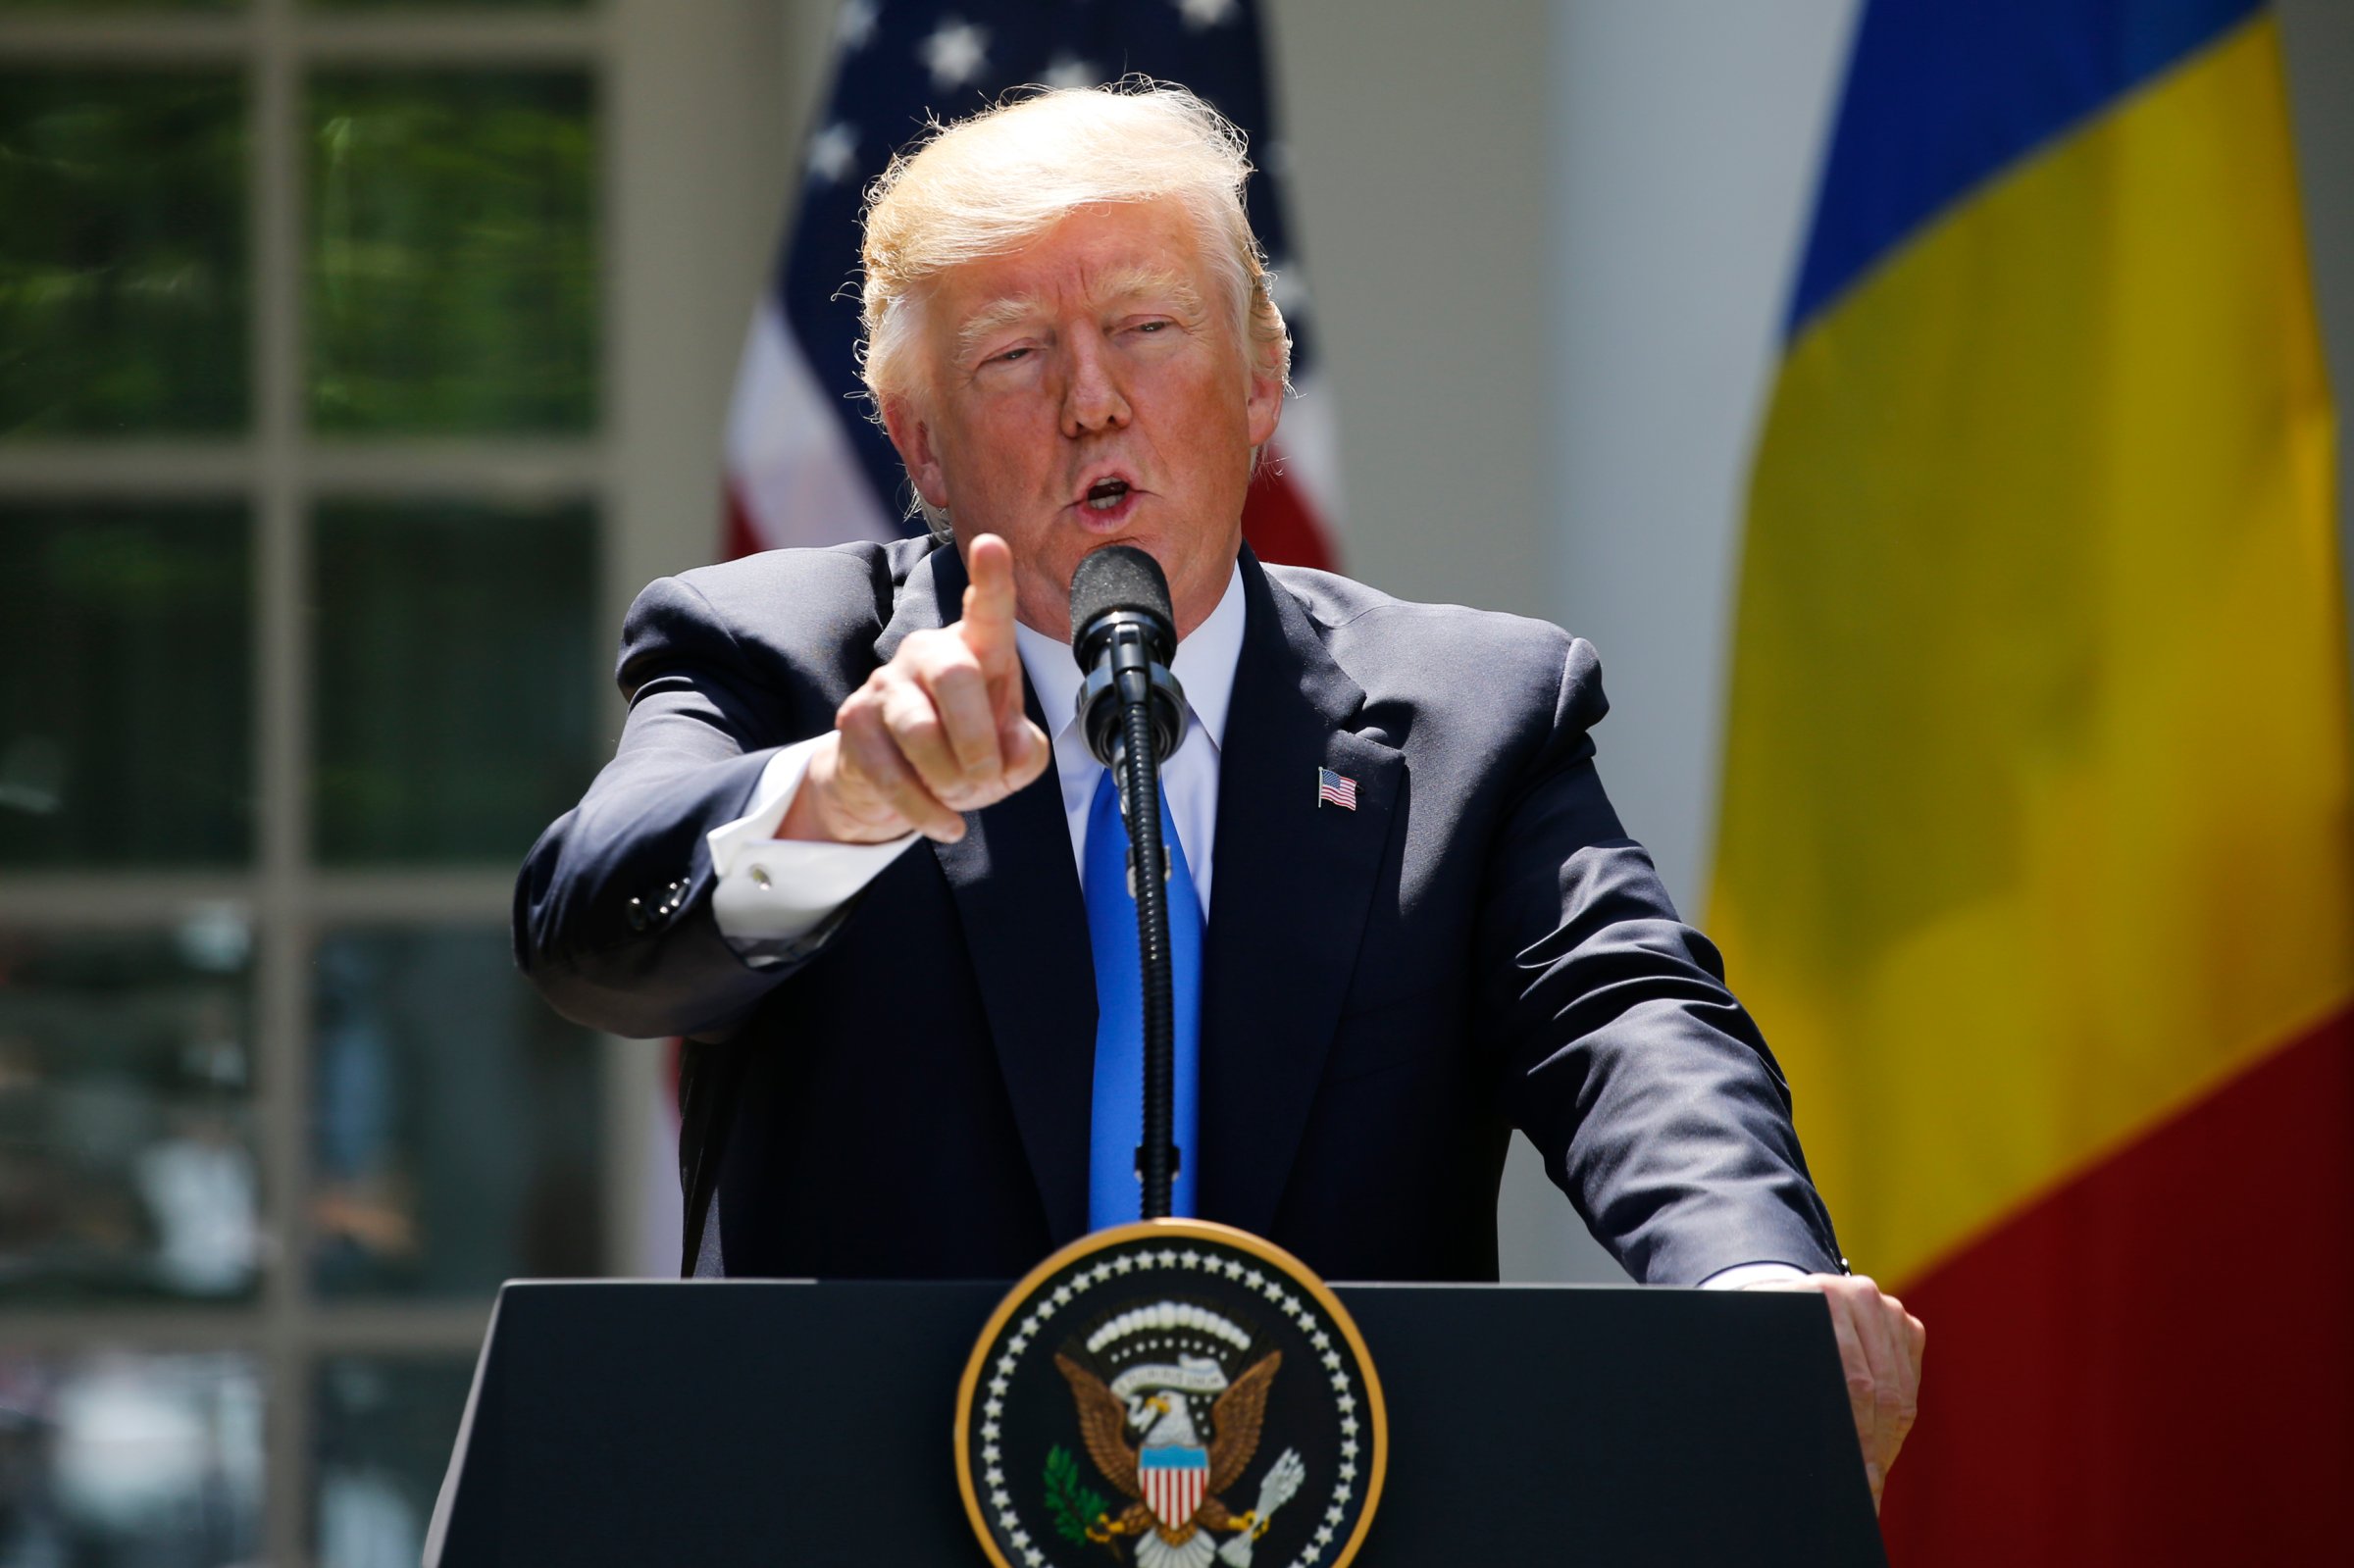 Trump reacts to a reporter's question during a joint news conference with Romanian Iohannis in the Rose Garden at the White House in Washington